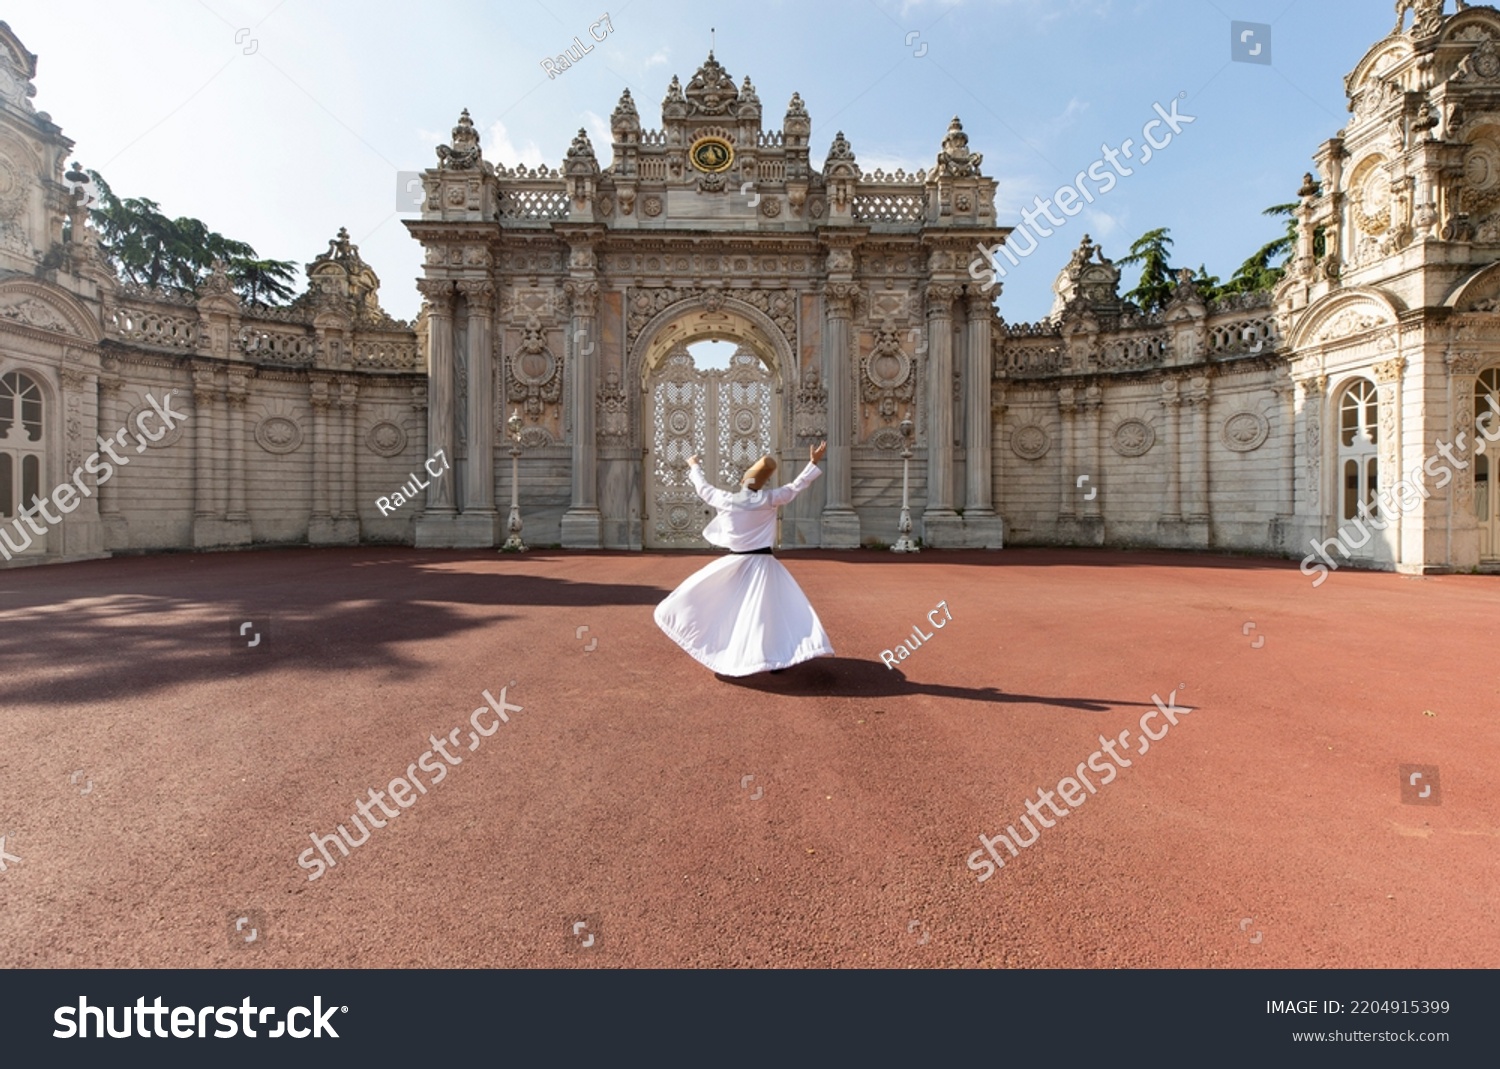 Sufi Whirling Dervish in the Dolmabahce Palace, Besiktas Istanbul, Turkey #2204915399